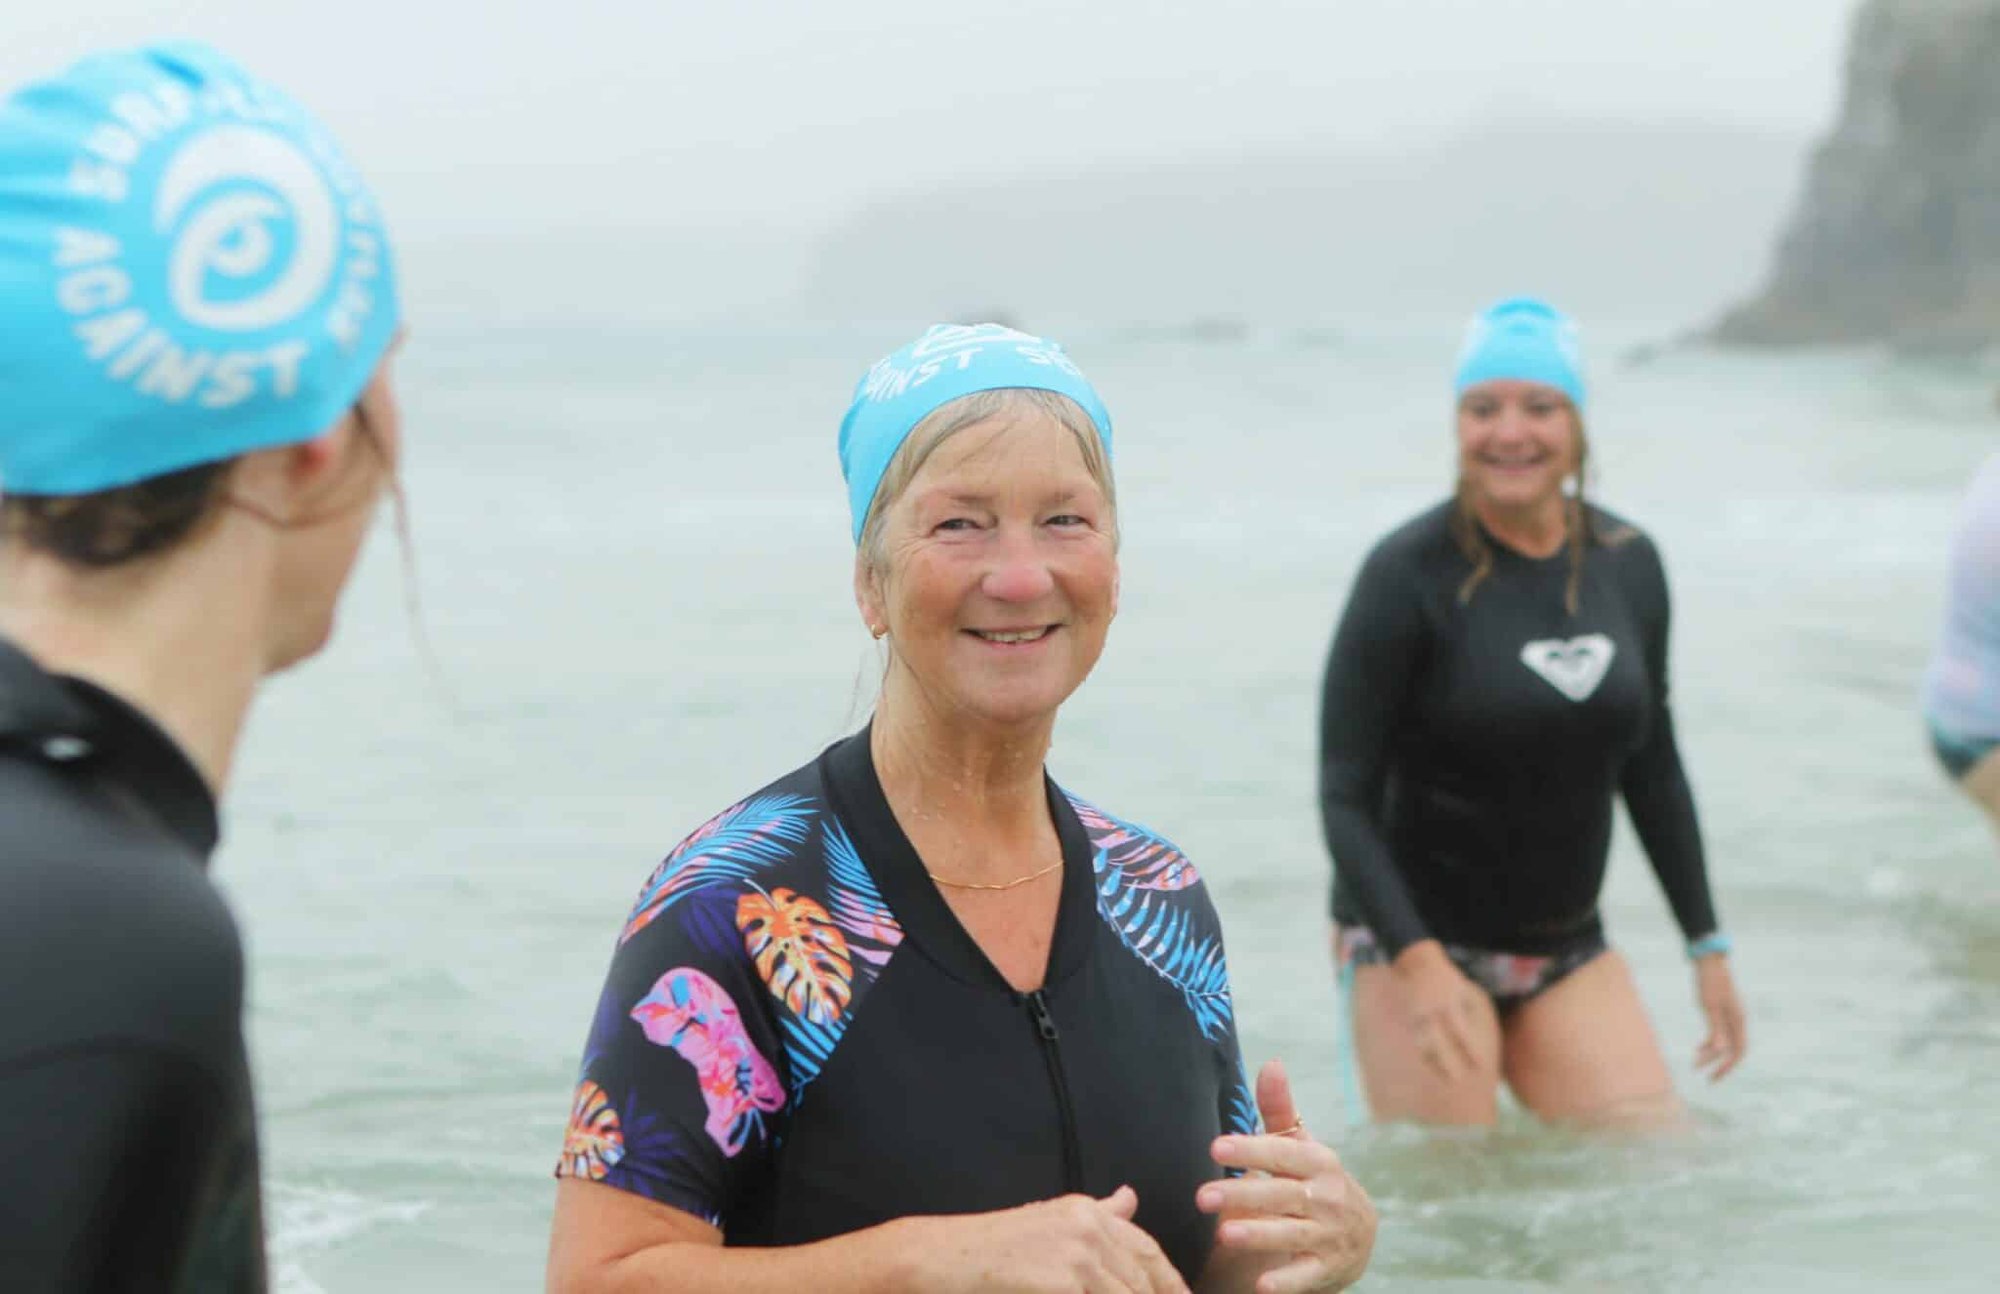 Photo of women standing in the sea. One woman is facing the camera, smiling. They are all wearing light blue swim caps which have Surfers Against Sewage's logo on the side. It is misty and the water is cloudy.